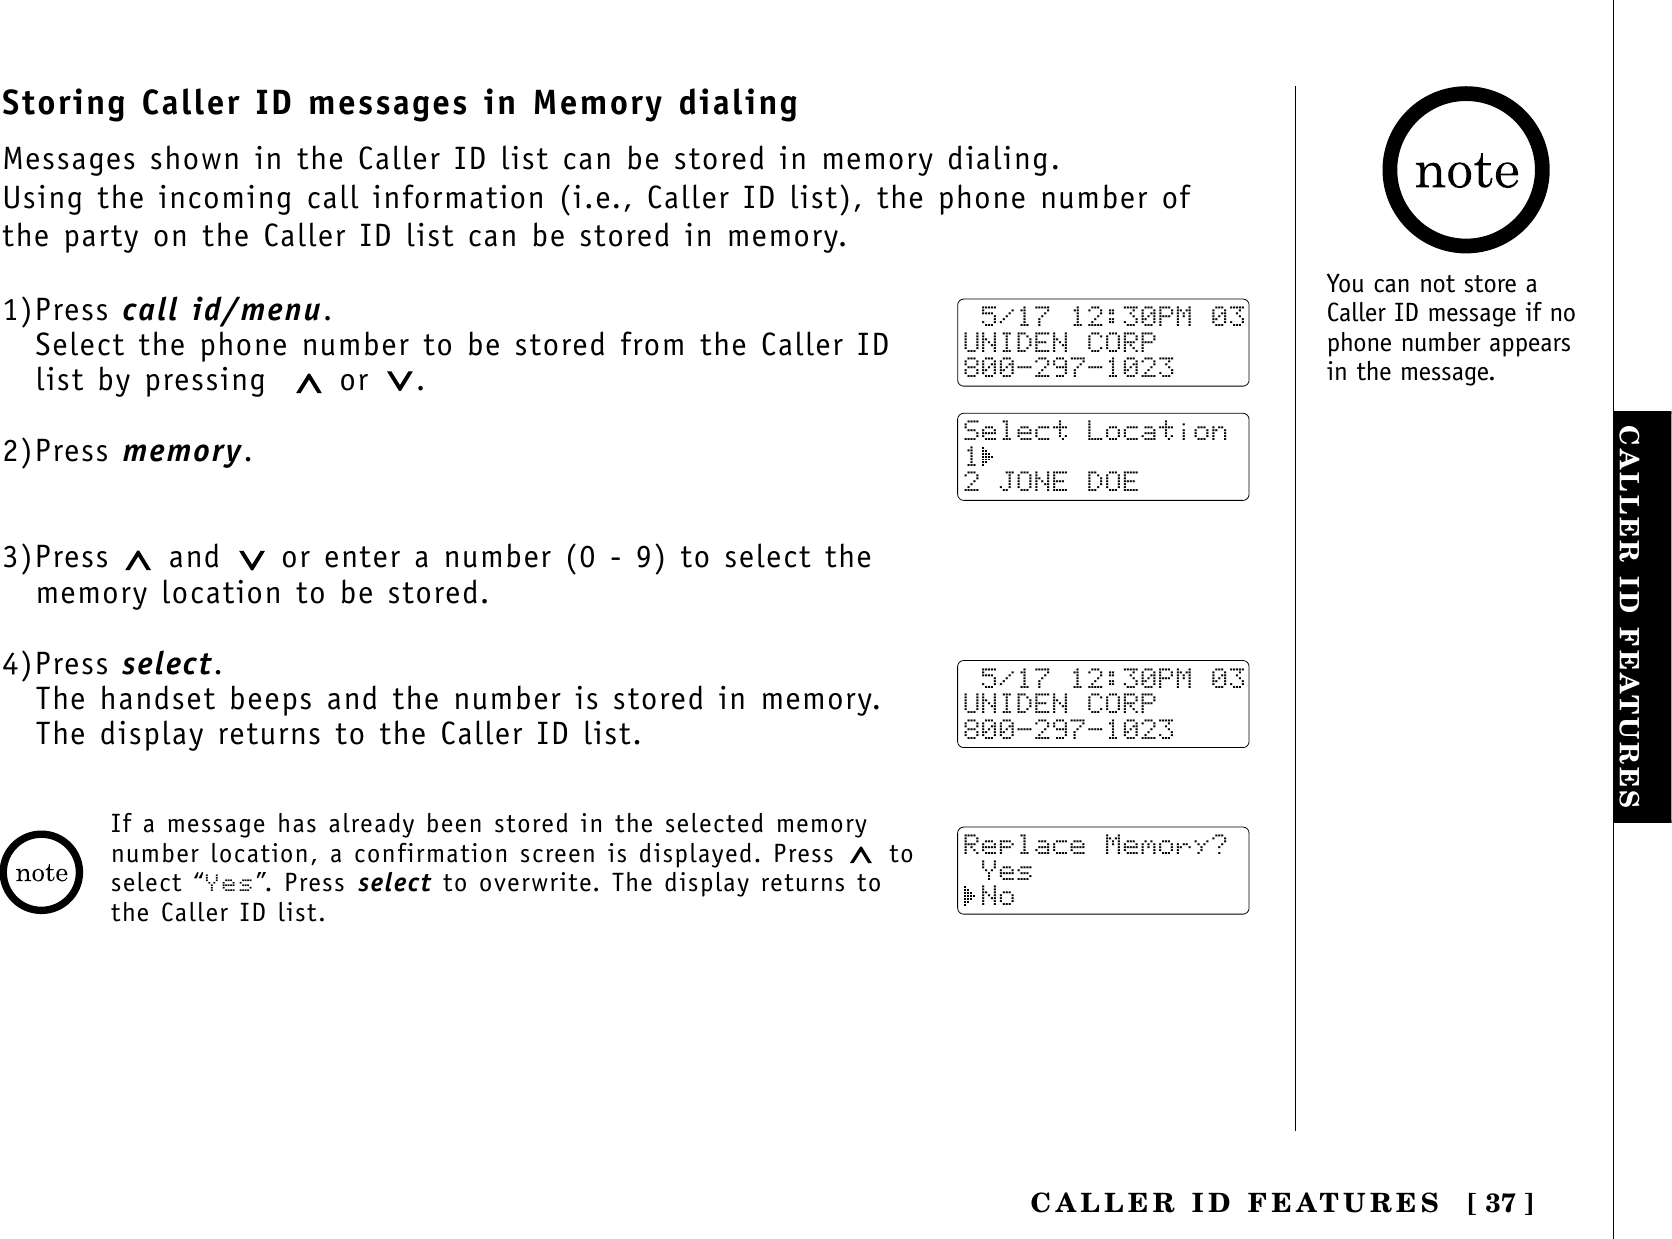 [ 37 ]CALLER ID FEATURESCALLER ID FEATURESStoring Caller ID messages in Memory dialingMessages shown in the Caller ID list can be stored in memory dialing.Using the incoming call information (i.e., Caller ID list), the phone number ofthe party on the Caller ID list can be stored in memory.1)Press call id/menu.Select the phone number to be stored from the Caller IDlist by pressing or .2)Press memory.3)Press  and or enter a number (0 - 9) to select the memory location to be stored.4)Press select.The handset beeps and the number is stored in memory. The display returns to the Caller ID list. 5/17 12:30PM 03UNIDEN CORP800-297-1023Select Location1 2 JONE DOE 5/17 12:30PM 03UNIDEN CORP800-297-1023Replace Memory? Yes NoIf a message has already been stored in the selected memorynumber location, a confirmation screen is displayed. Press  toselect “Yes”. Press select to overwrite. The display returns tothe Caller ID list.You can not store aCaller ID message if nophone number appearsin the message.